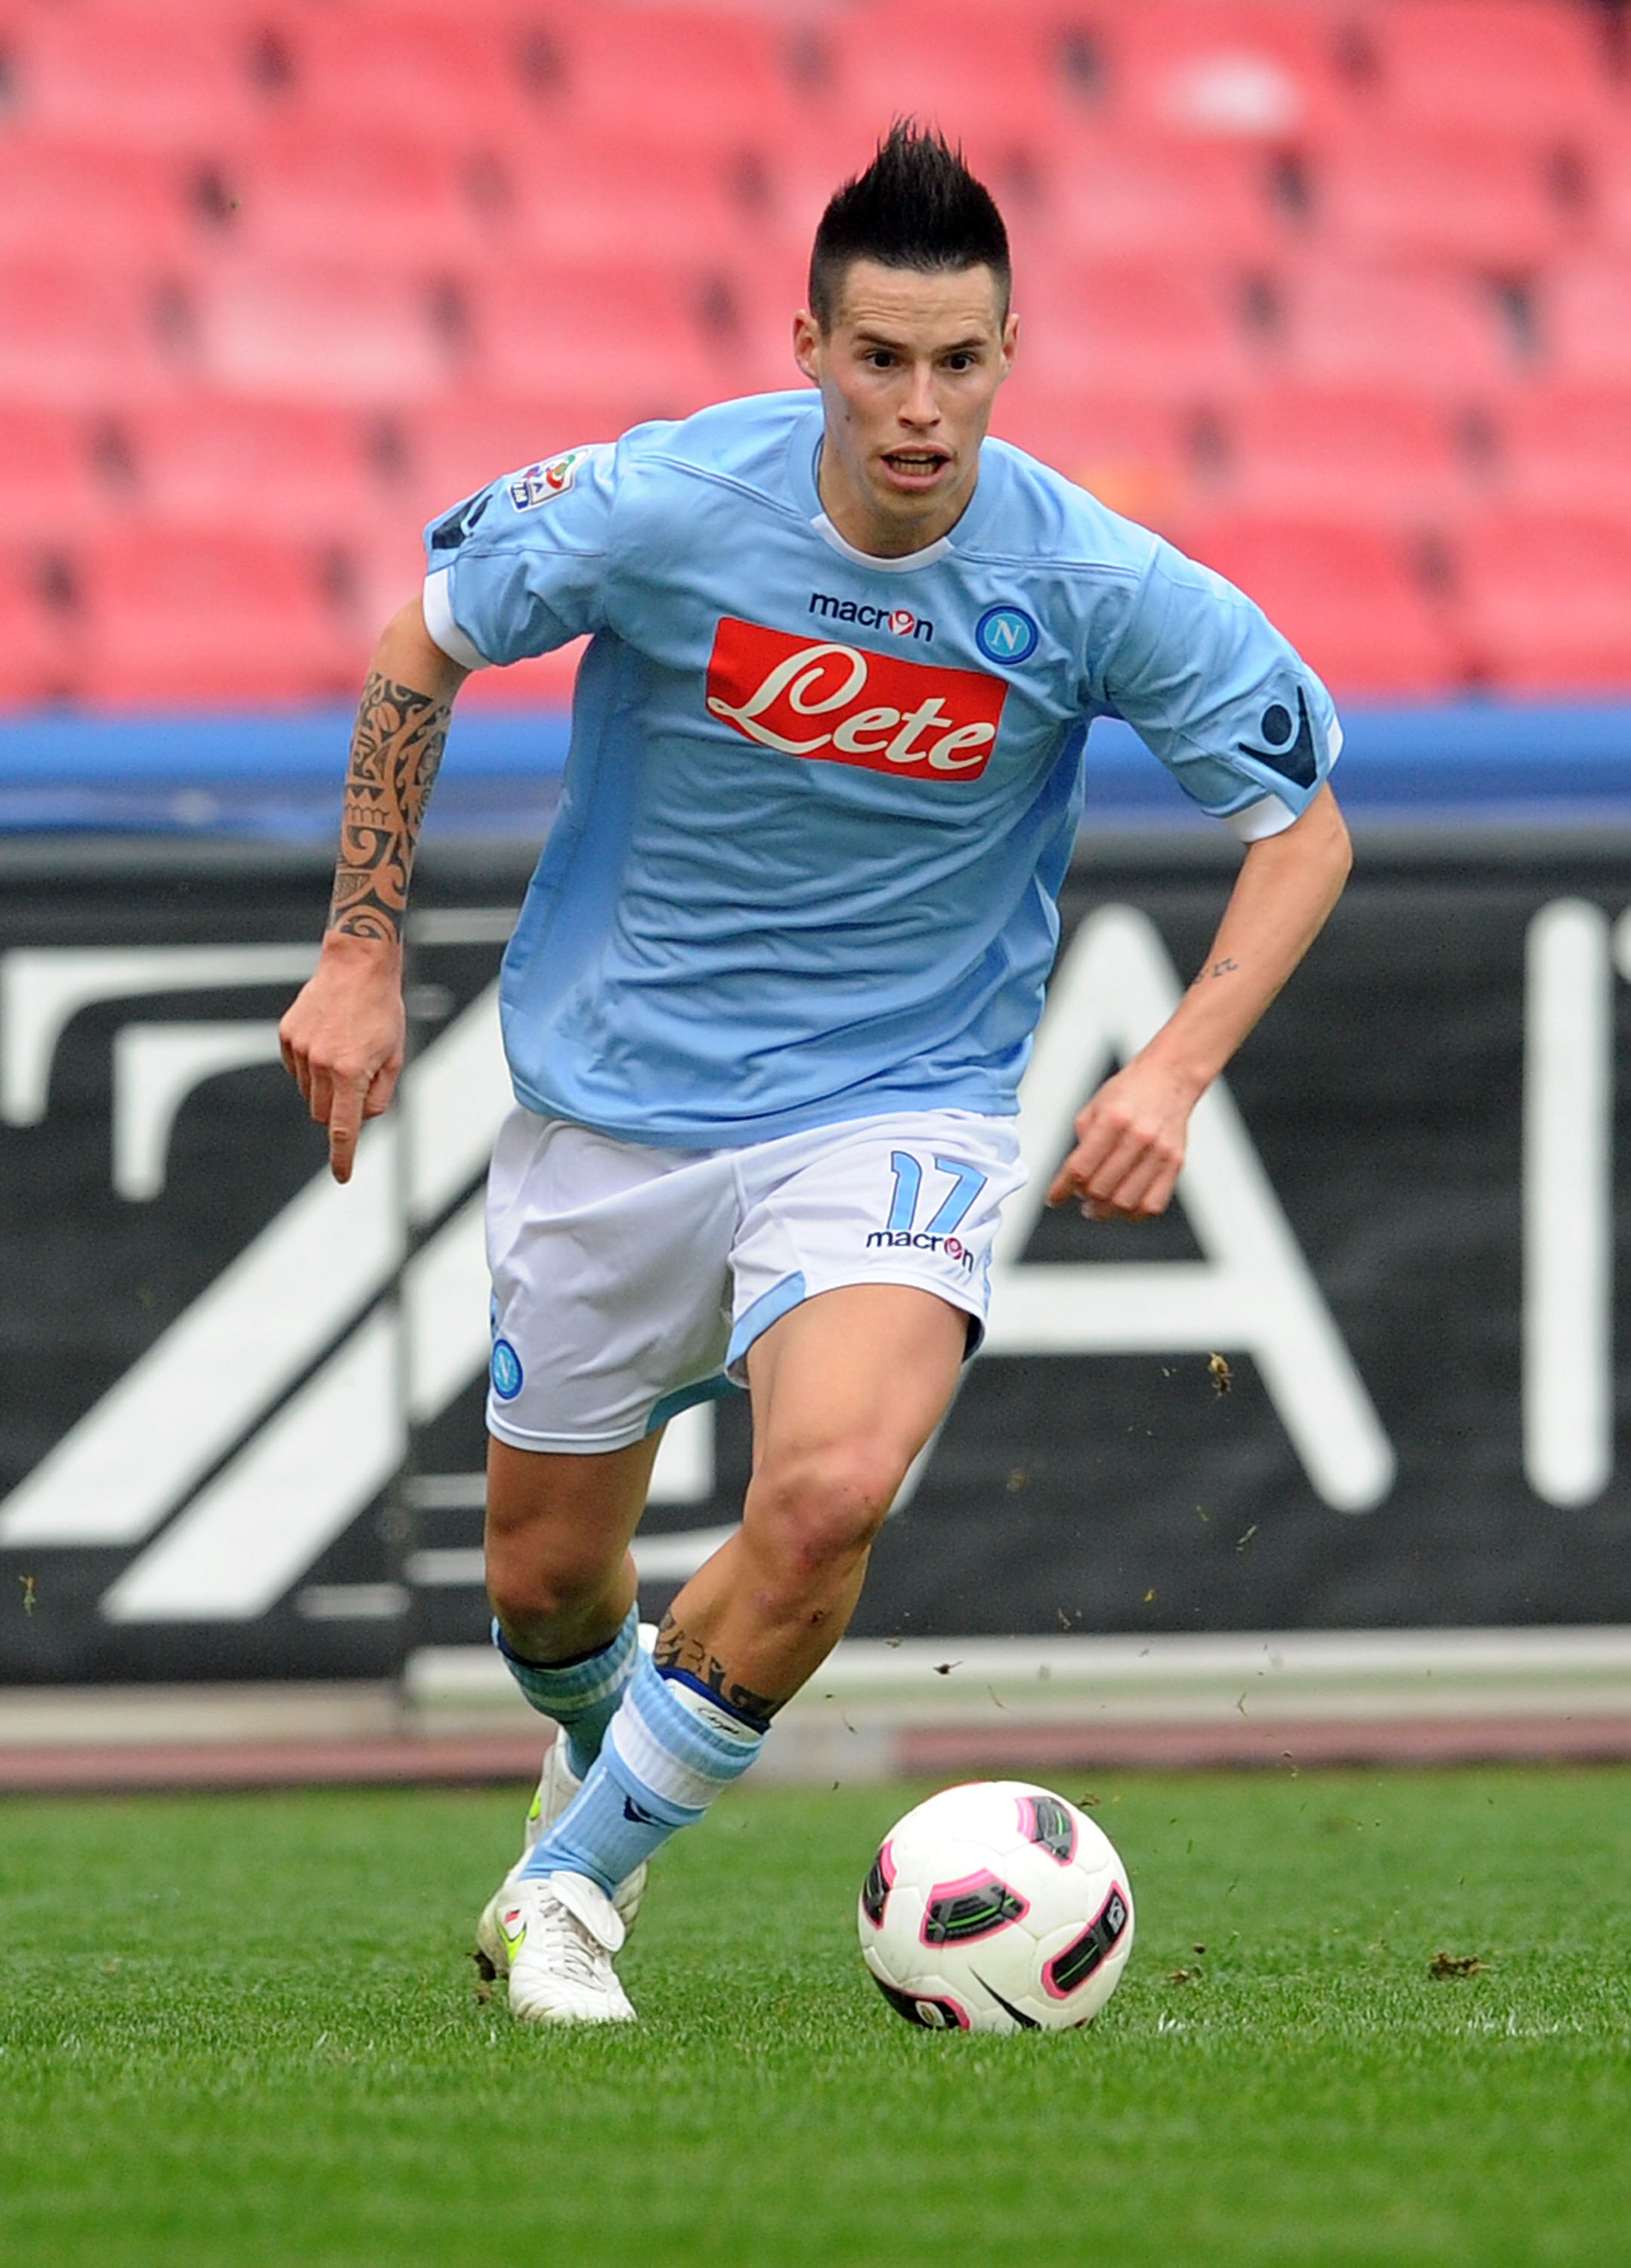 NAPLES, ITALY - MARCH 06:  Marek Hamsik of Napoli in action during the Serie A match between SSC Napoli and Brescia Calcio at Stadio San Paolo on March 6, 2011 in Naples, Italy.  (Photo by Giuseppe Bellini/Getty Images)